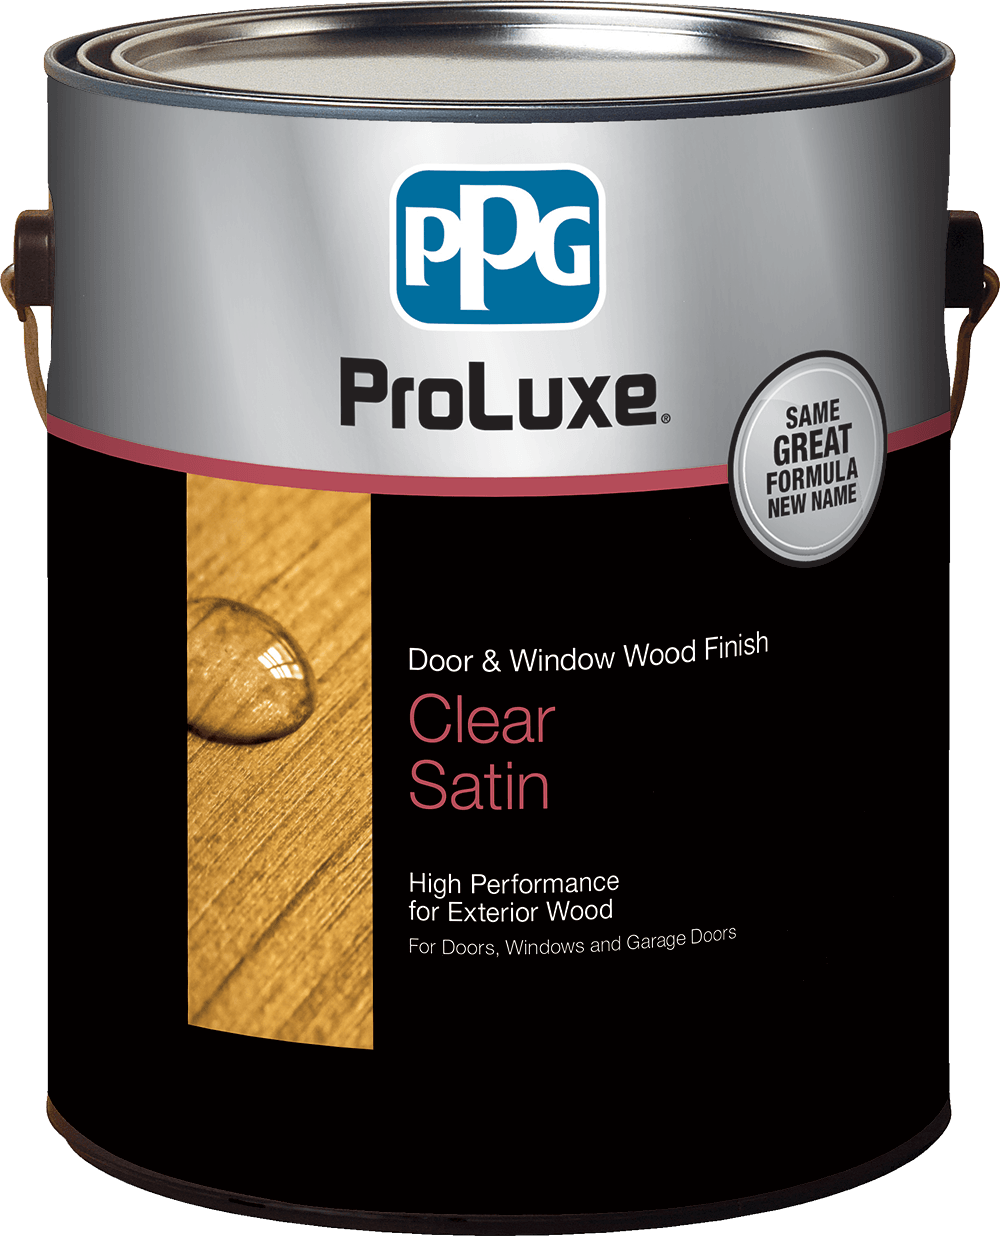 PROLUXE® Door & Window Wood Finish from PPG at 21st Century paints near Holland, Ohio (OH)